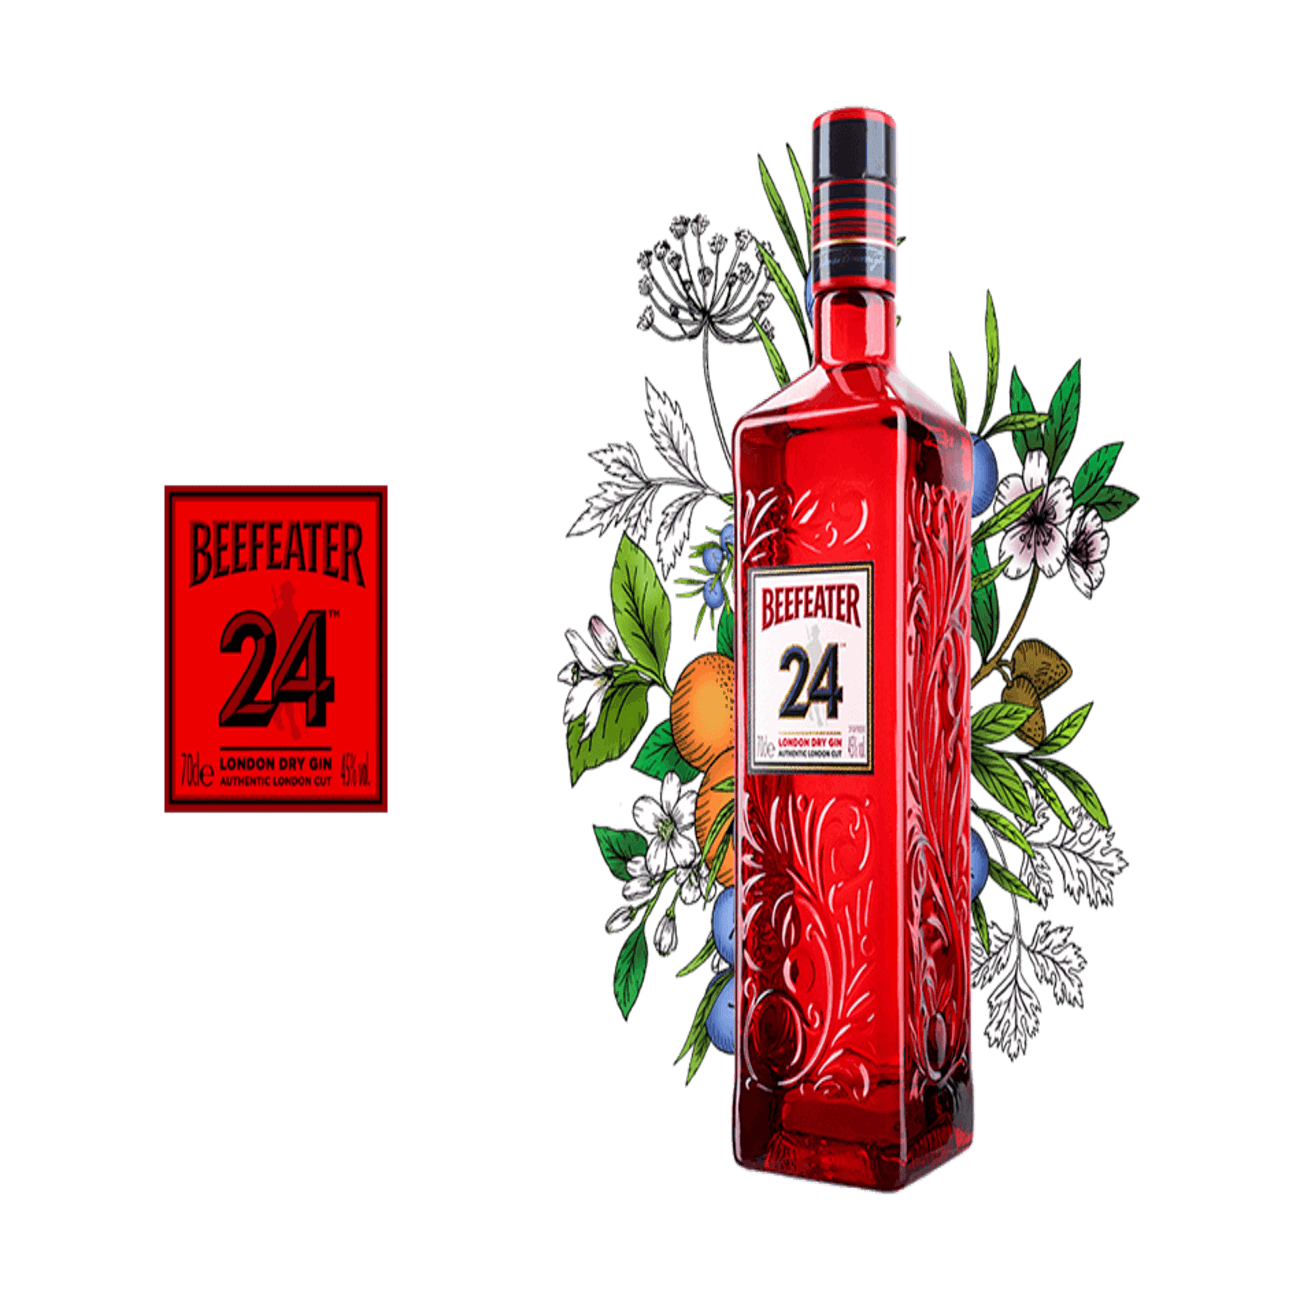 Beefeater 24 London Dry 750ml